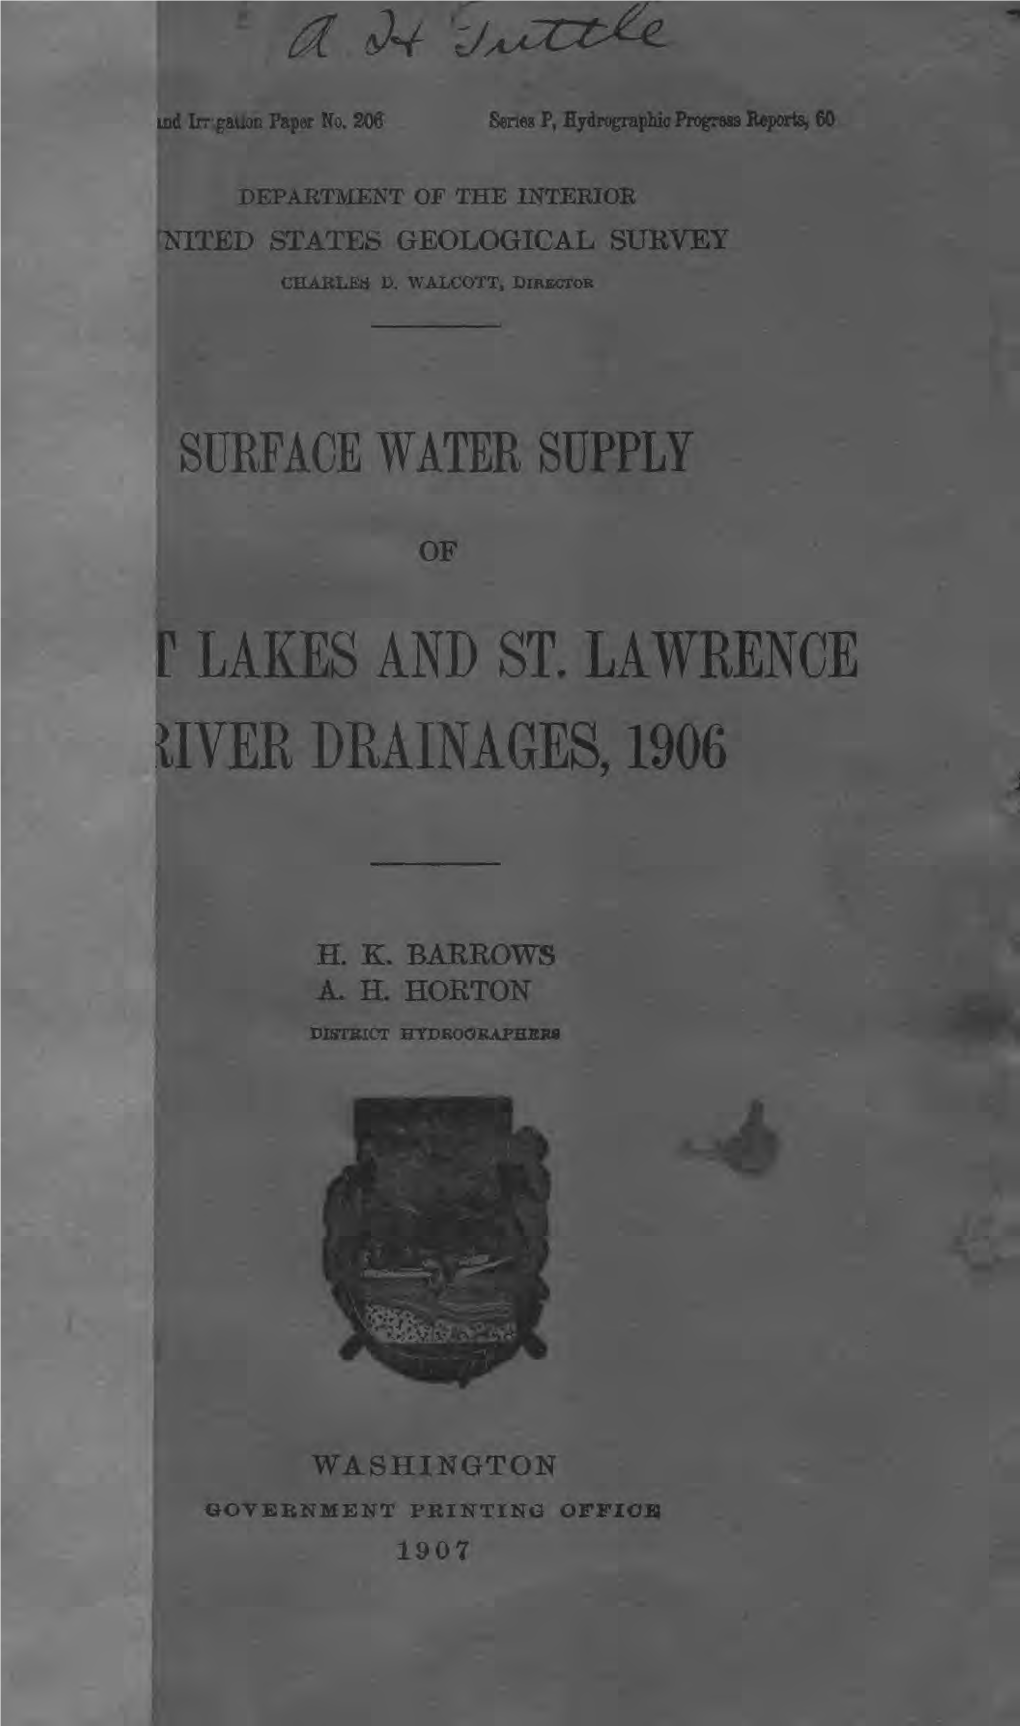 F LAKES and ST. LAWRENCE IIYER DRAINAGES, 1906